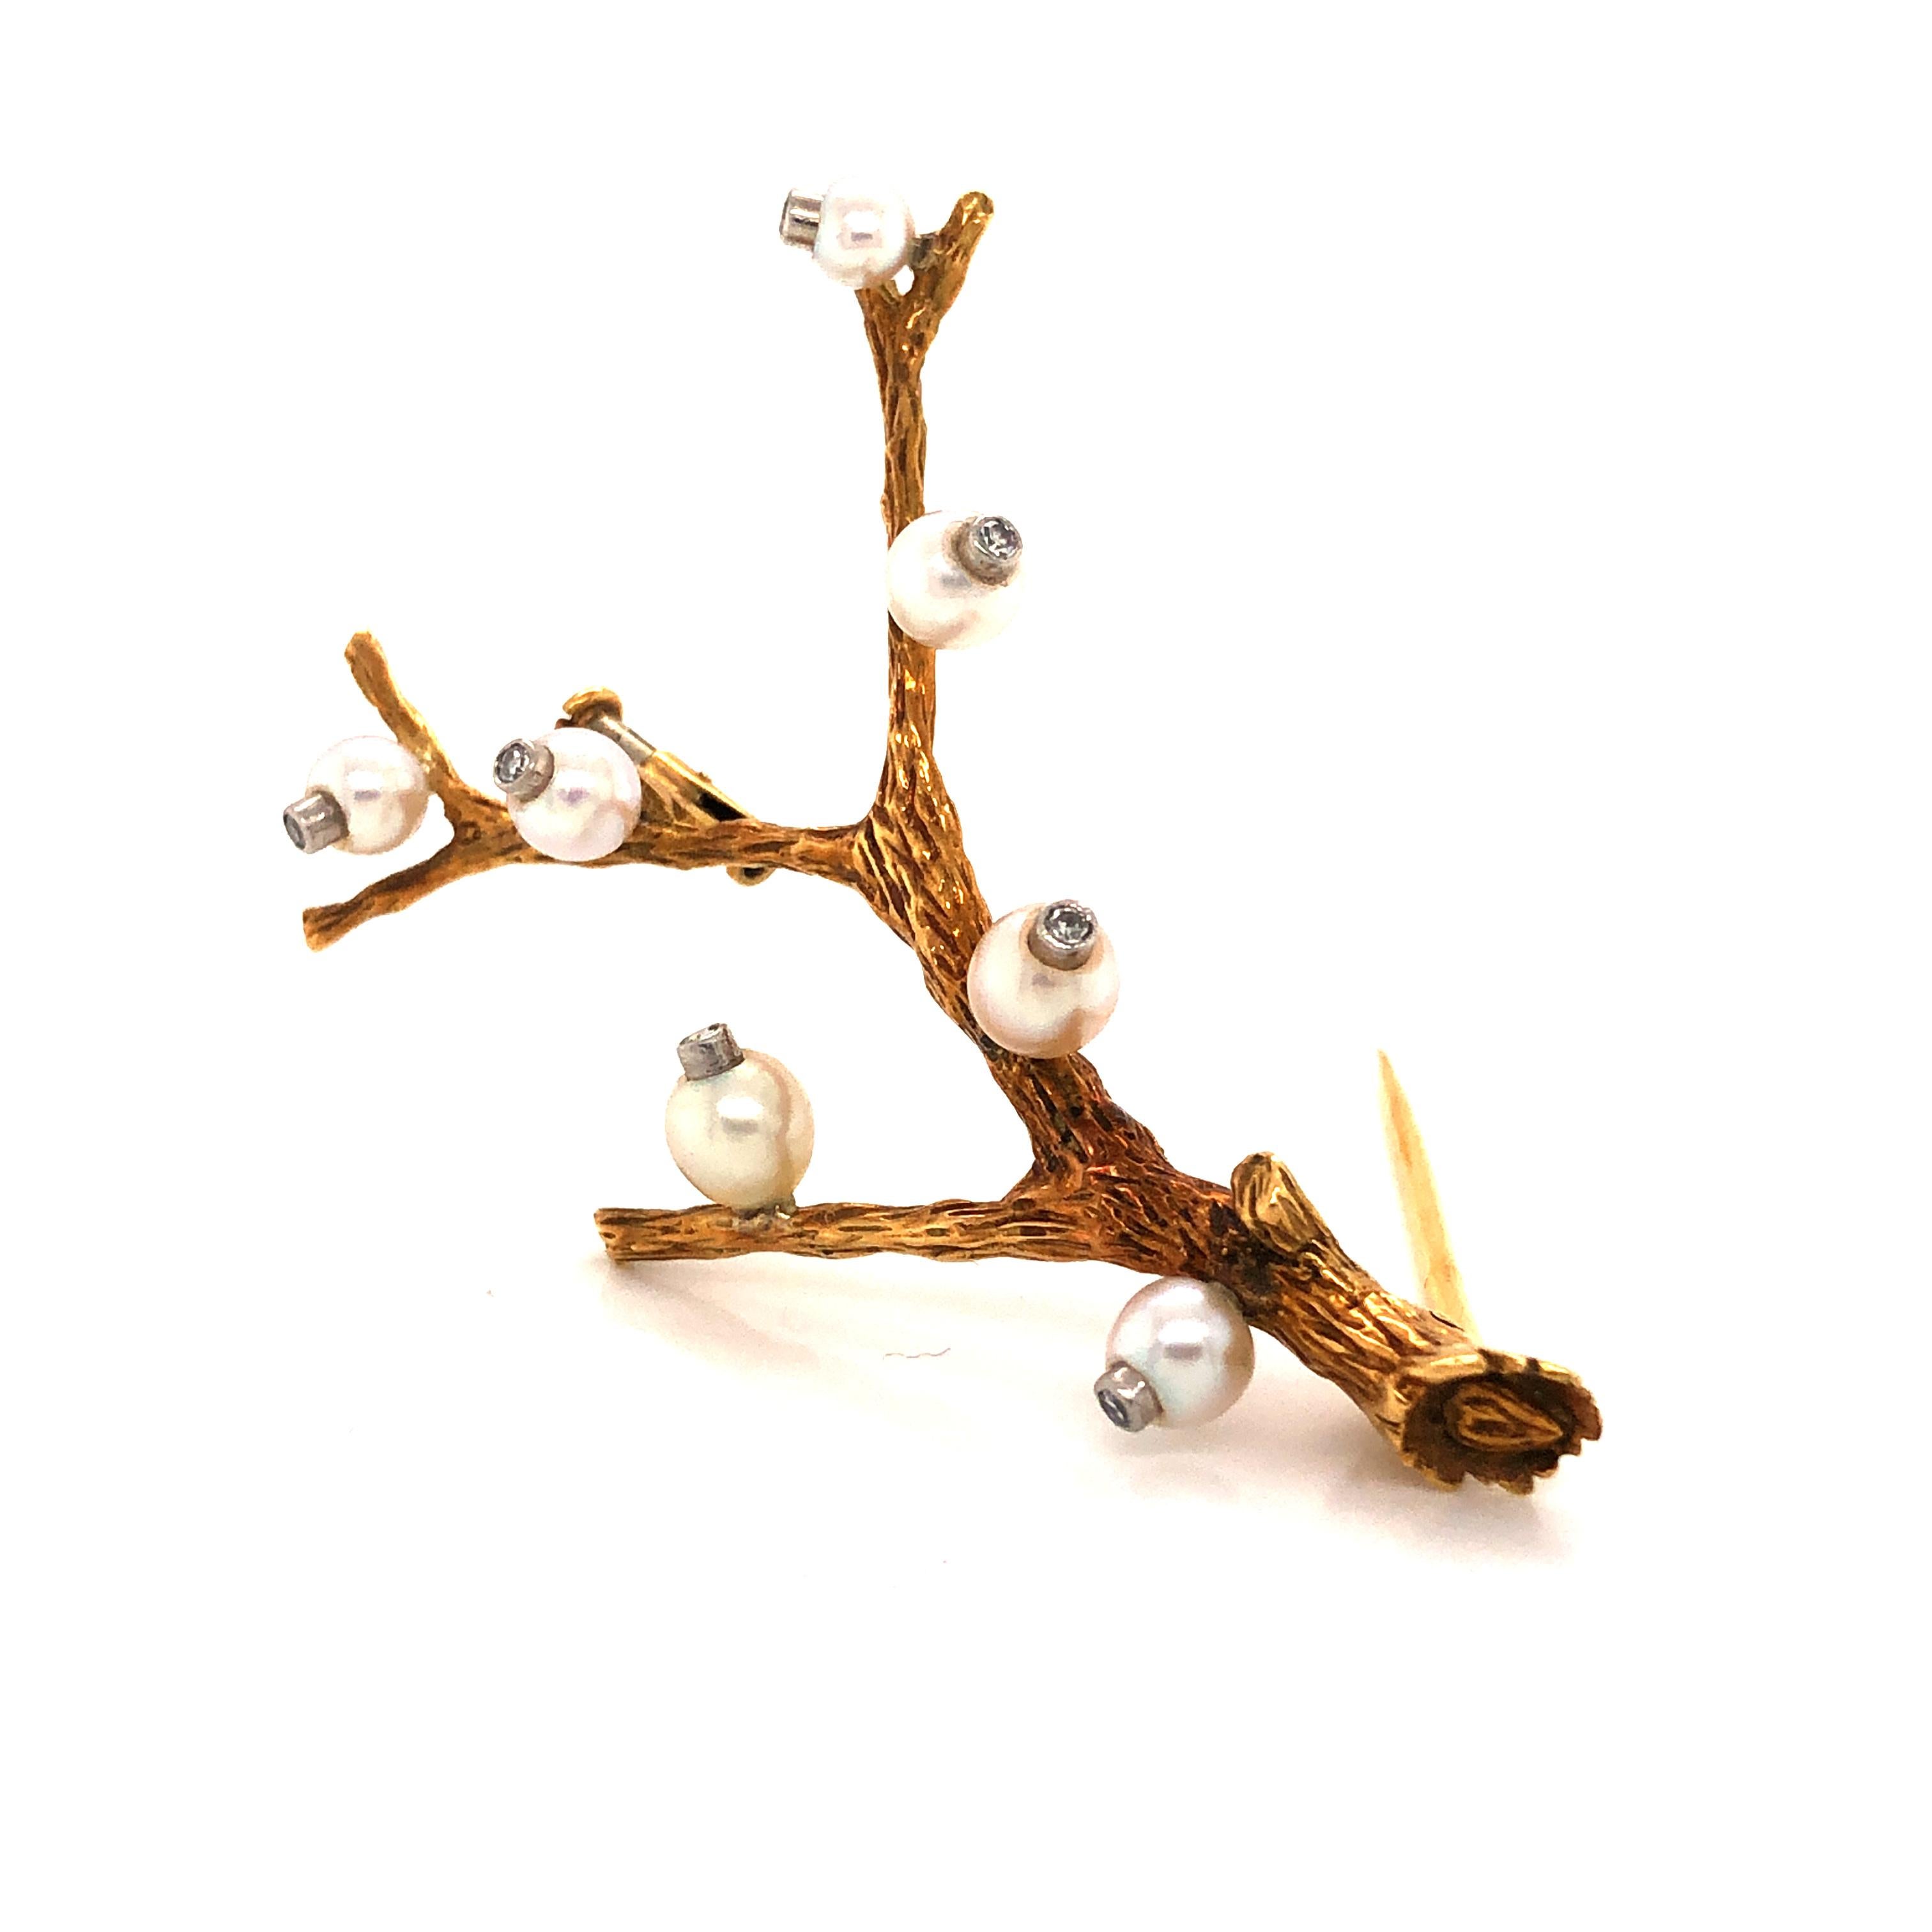 Gorgeous design from famed designer Pierre Sterle. This vintage brooch is crafted in 18k yellow gold.  The brooch shows exquisite detail as it depicts a branch set with natural pearls and diamonds. The detail on the branch is phenomenal as the tree